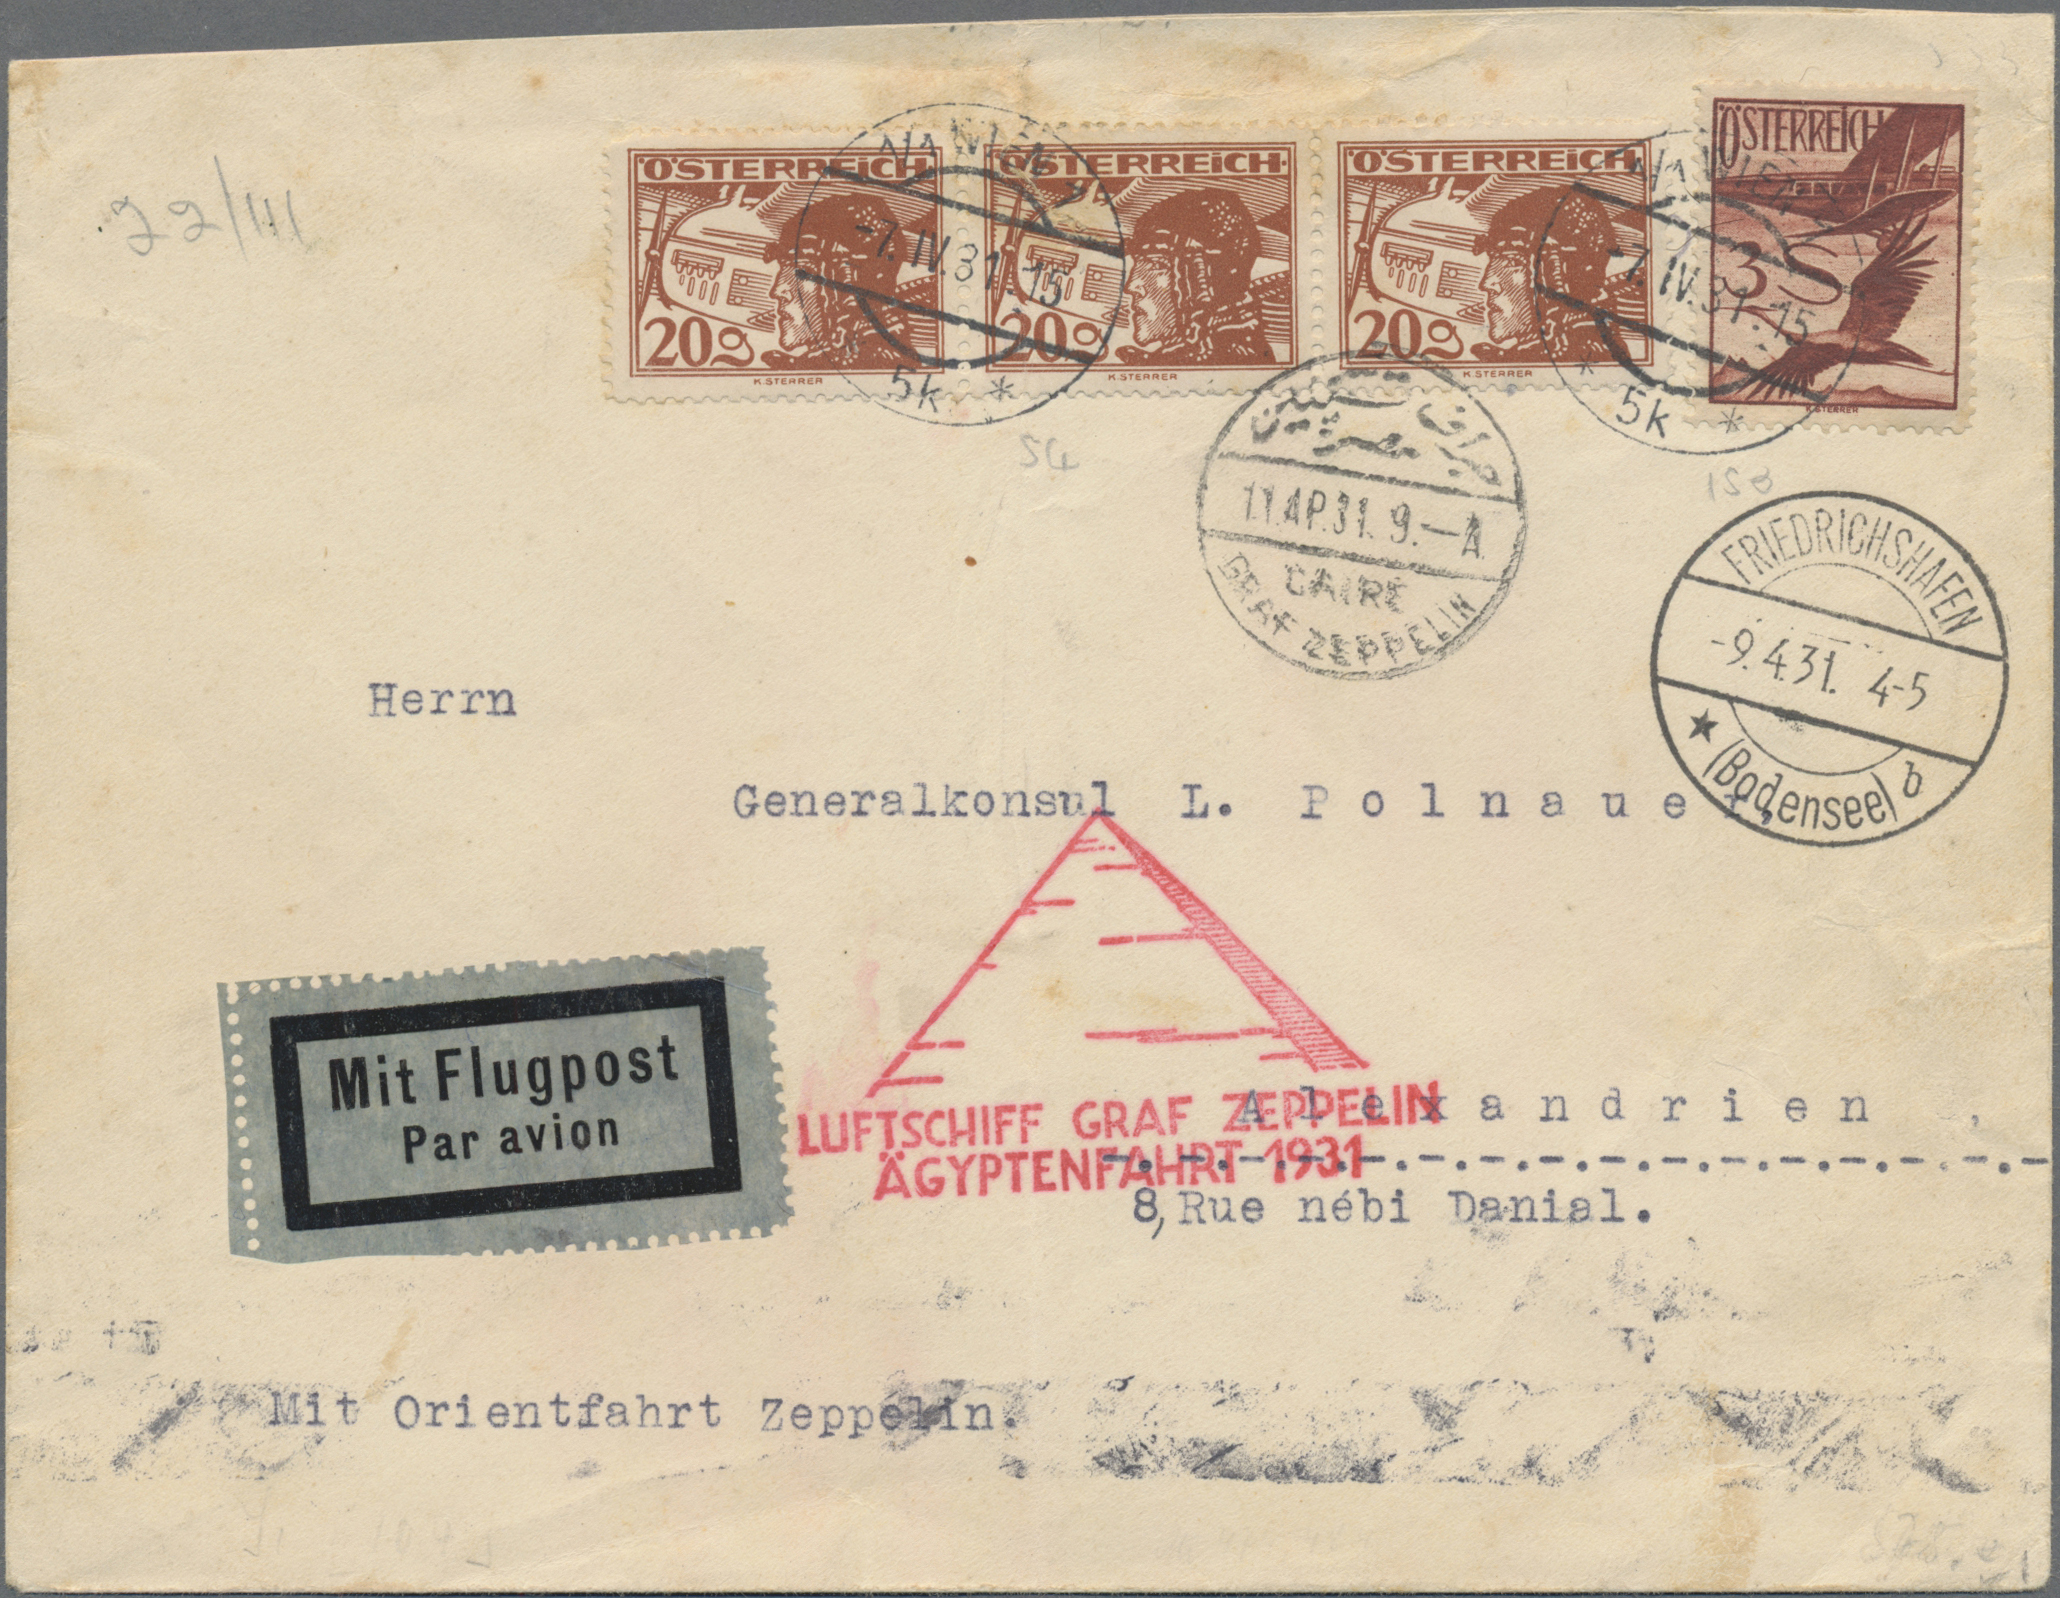 Lot 3662B - zeppelinpost europa  -  Auktionshaus Christoph Gärtner GmbH & Co. KG 54th AUCTION - Day 2